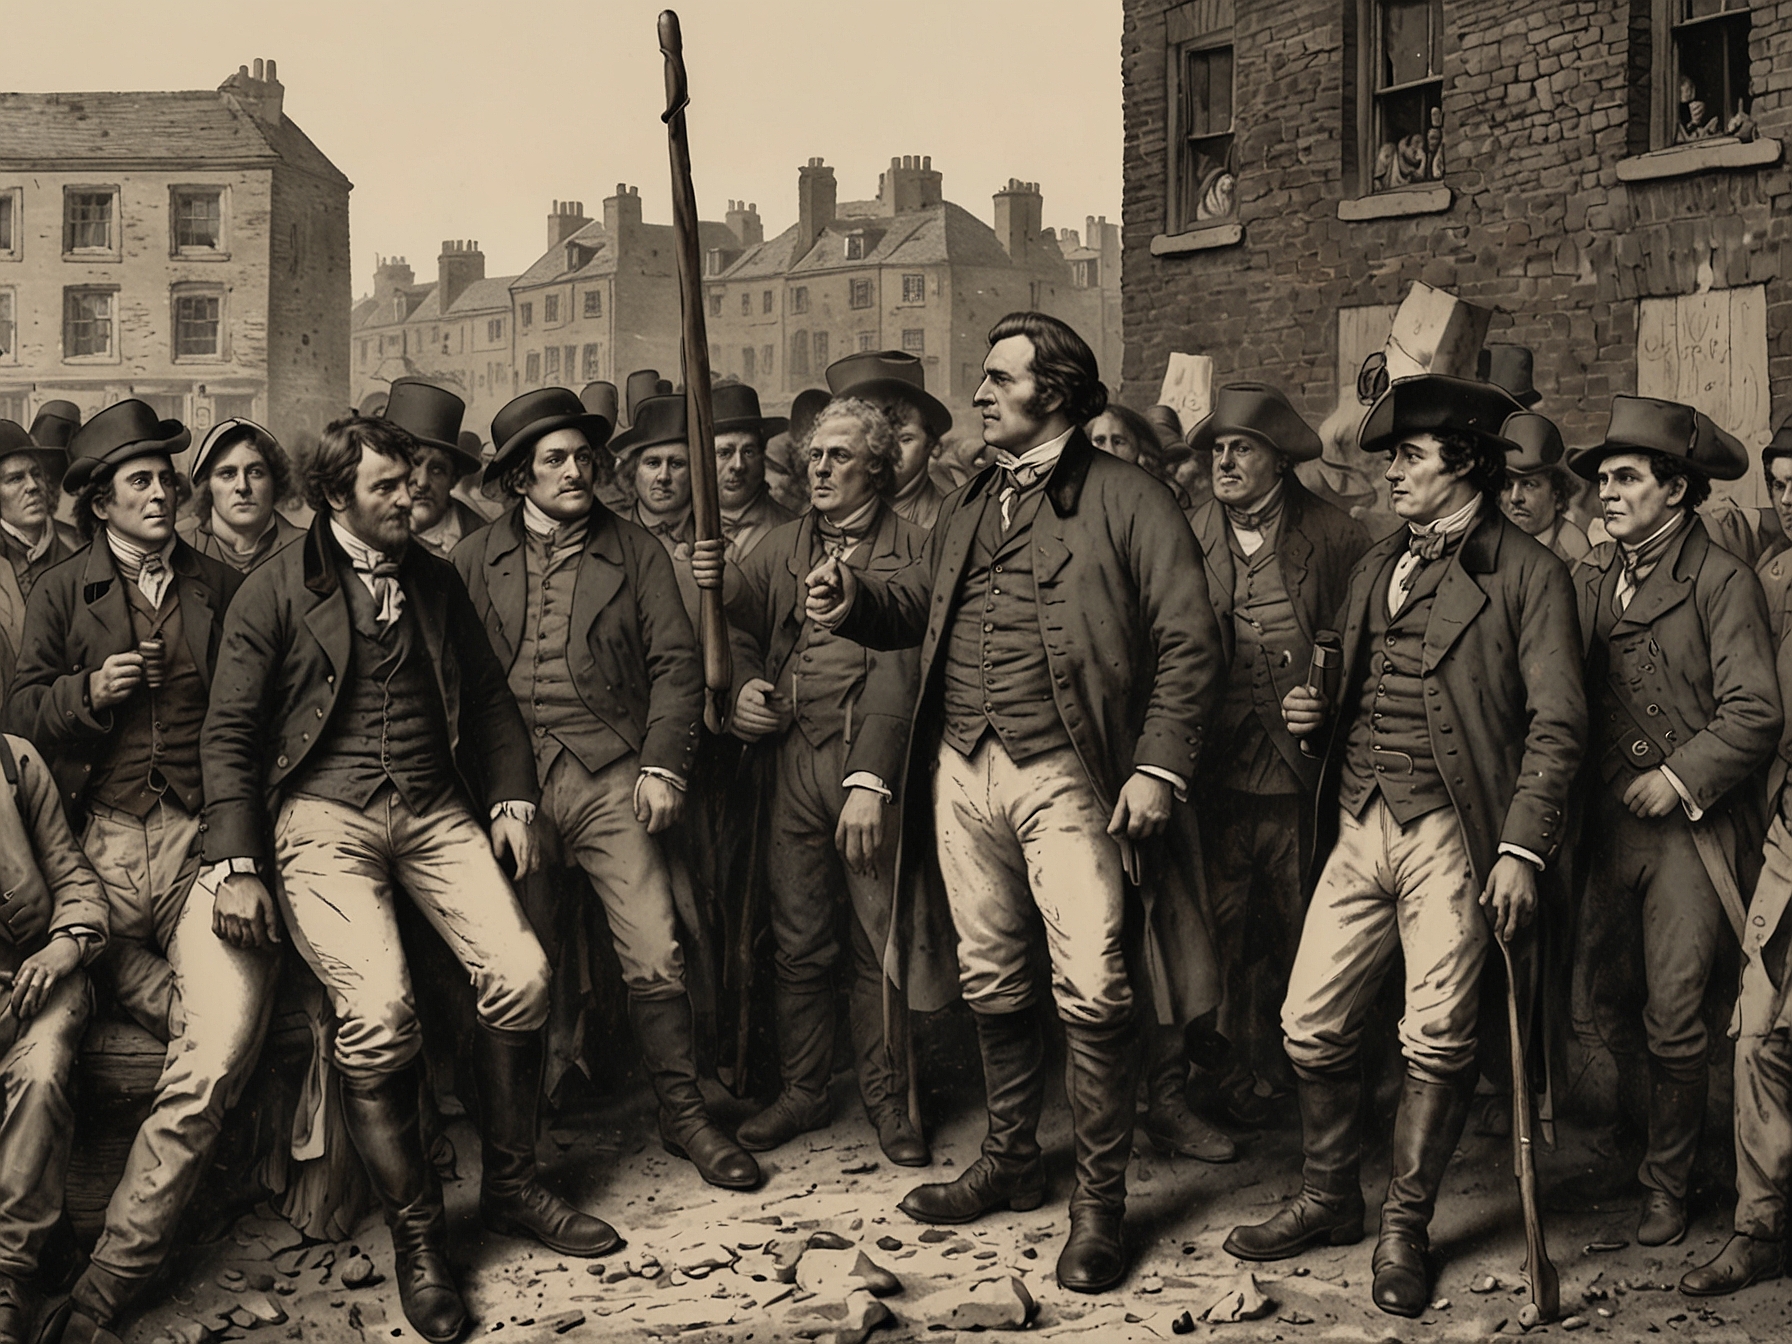 A group of actors on the set of 'Peterloo', depicting the Peterloo Massacre, highlighting the historical significance of the event and reflecting Leigh's dedication to connecting past struggles with present-day societal issues.